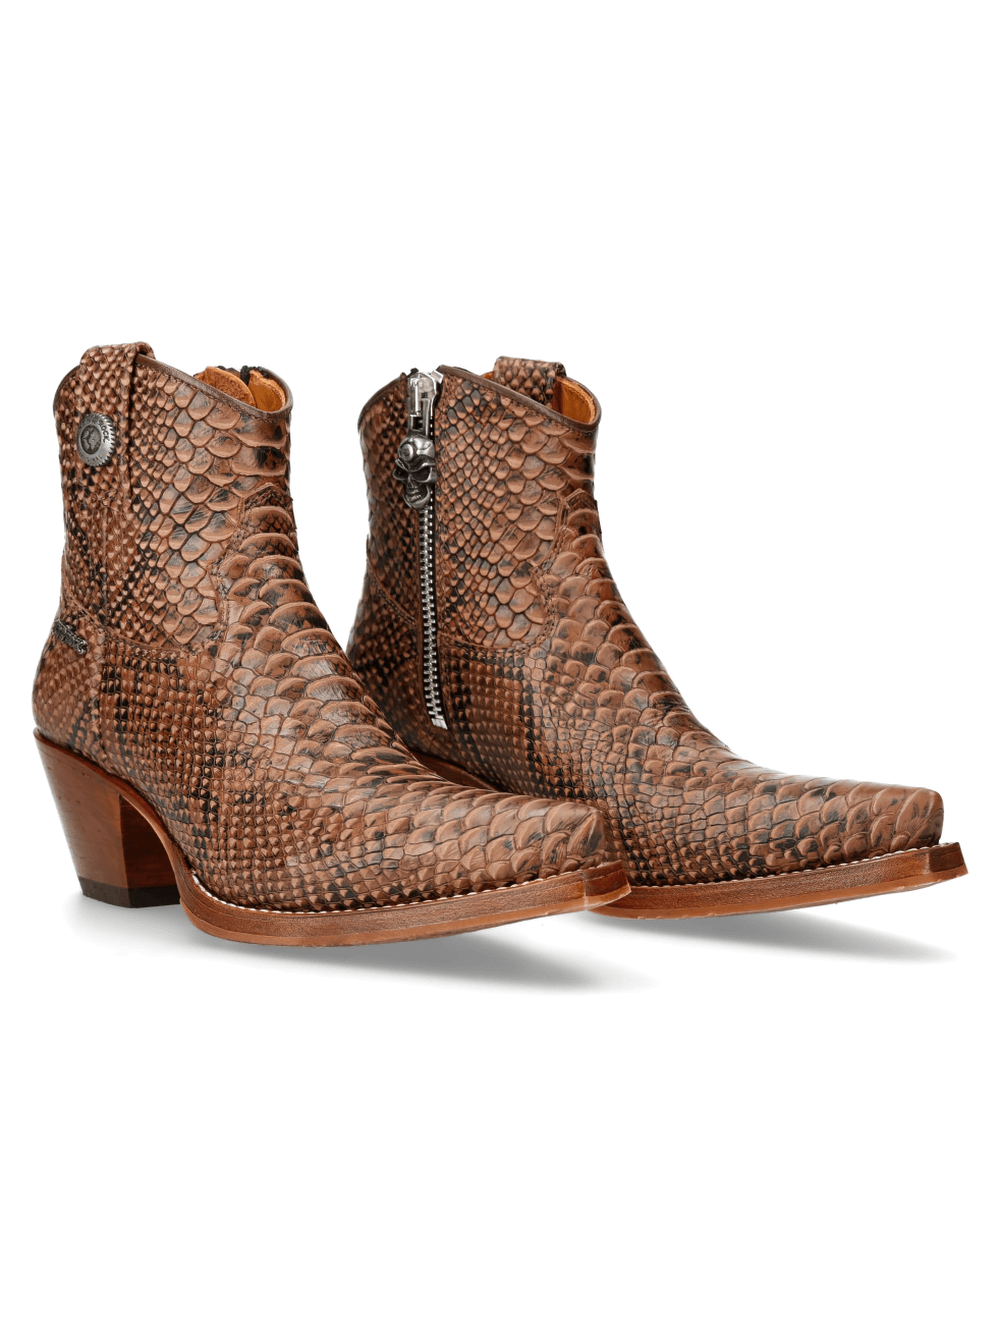 NEW ROCK Brown Python Print Ankle Boots with Zipper